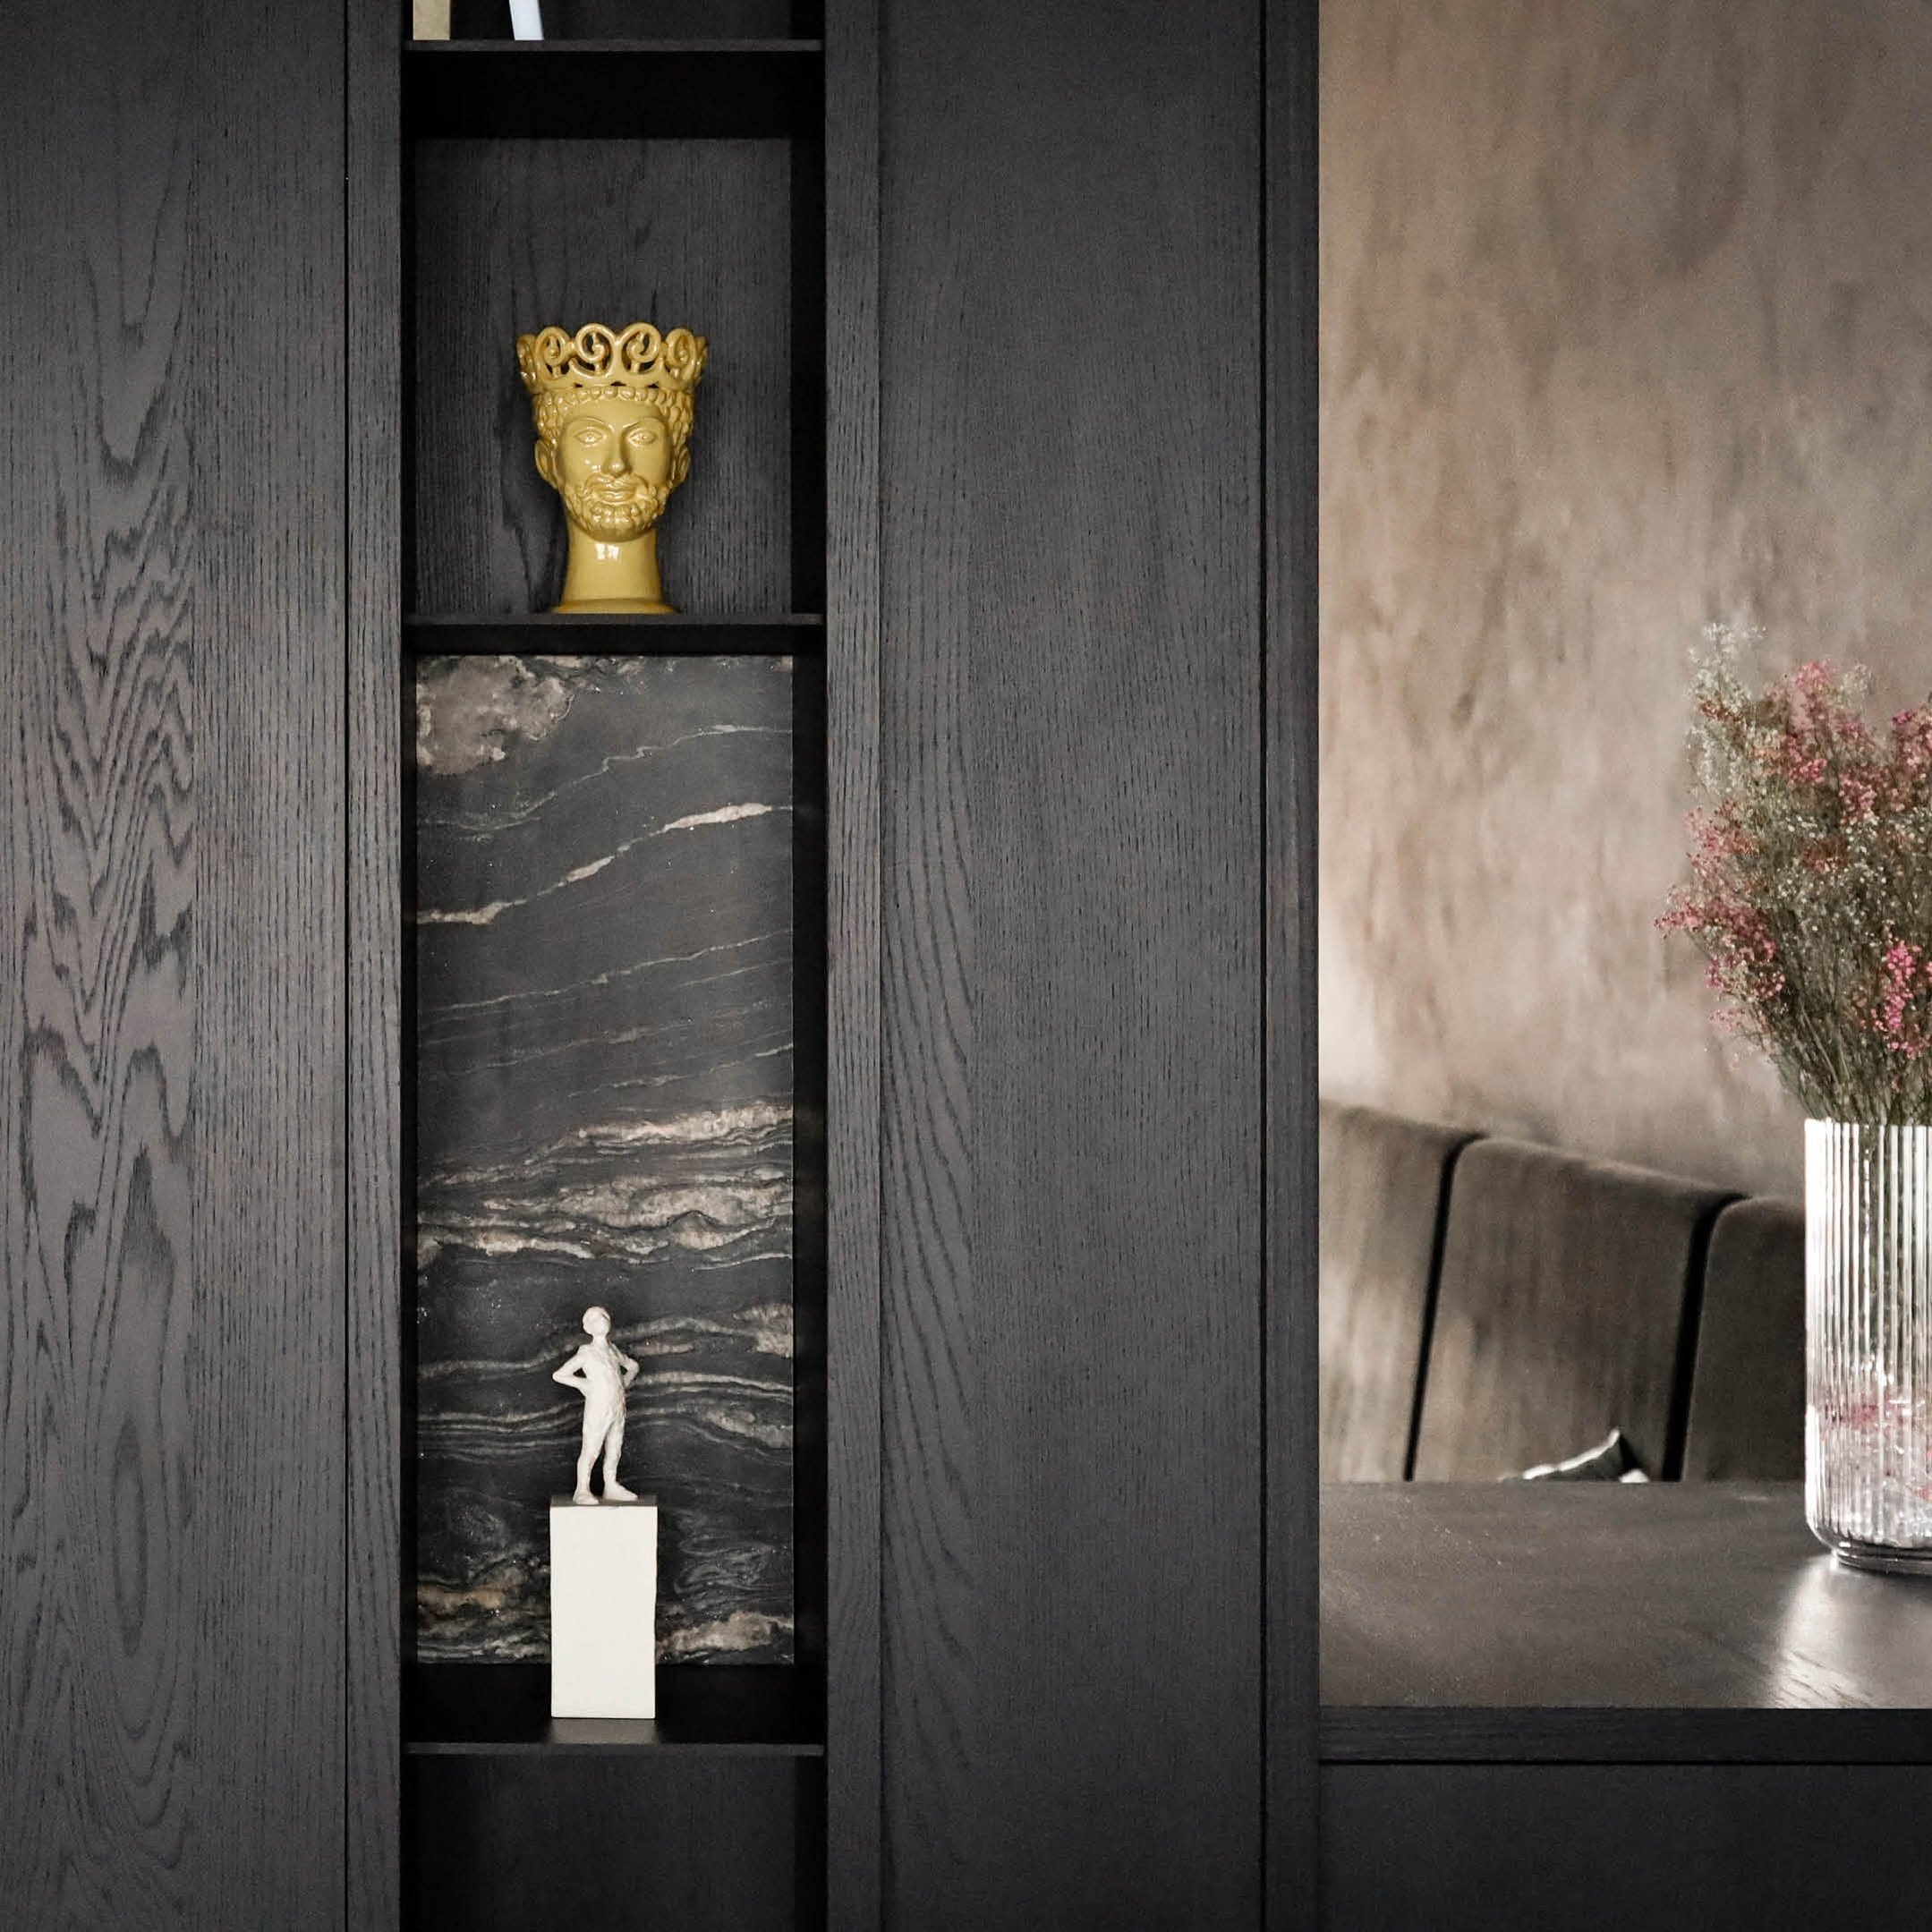 This central bookcase forms a focal point within the restaurant. Its dark and warm materials blend seamlessly into the space, while the objects placed within get their own moment to shine.

CHEFW | horeca - interieur